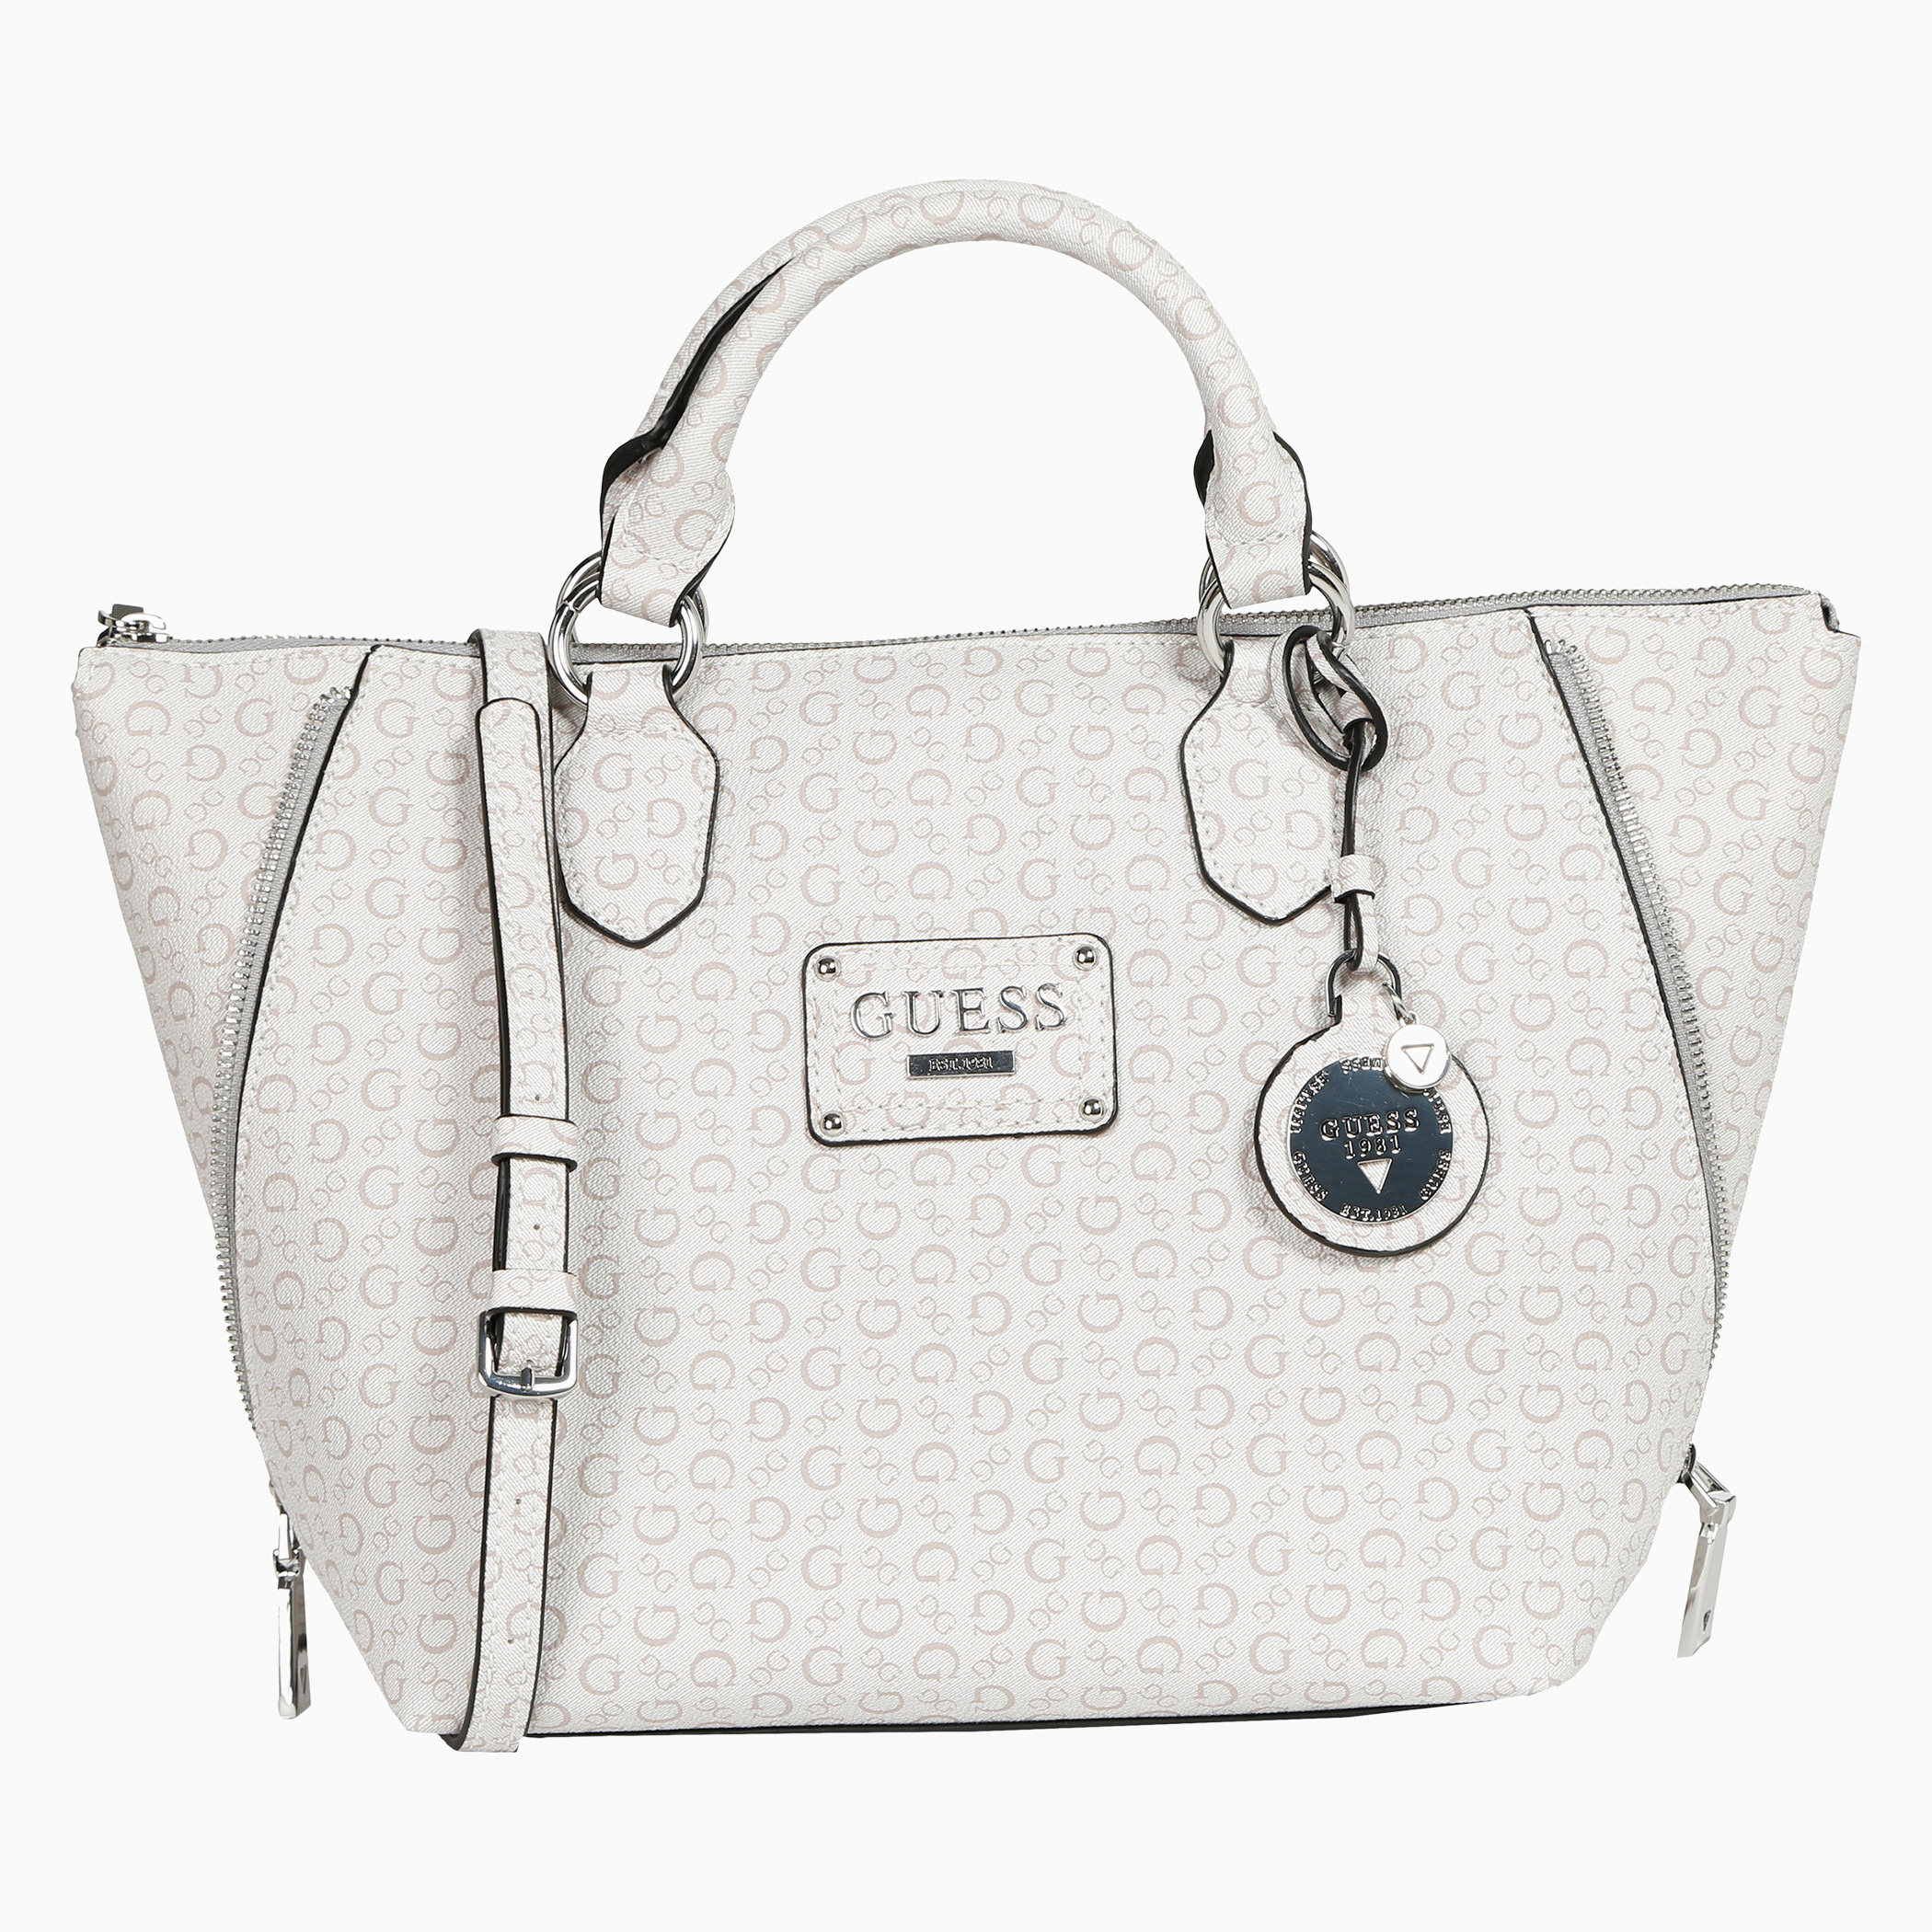 Buy Guess Bags & Handbags online - Men - 1 products | FASHIOLA.in